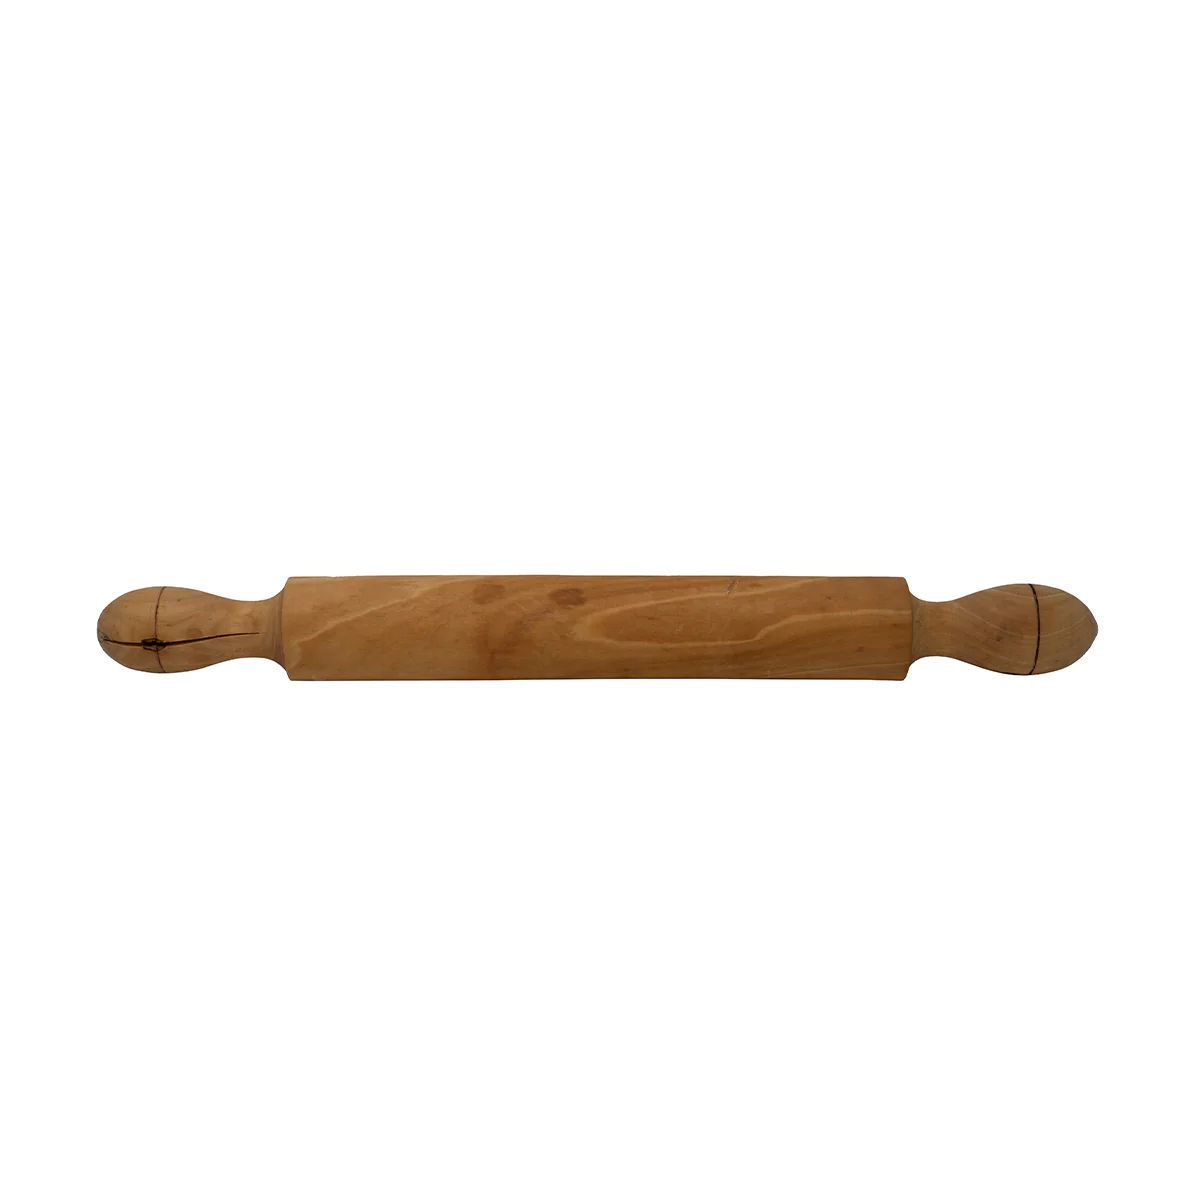 Vintage Wooden Rolling Pin | Tuesday Made